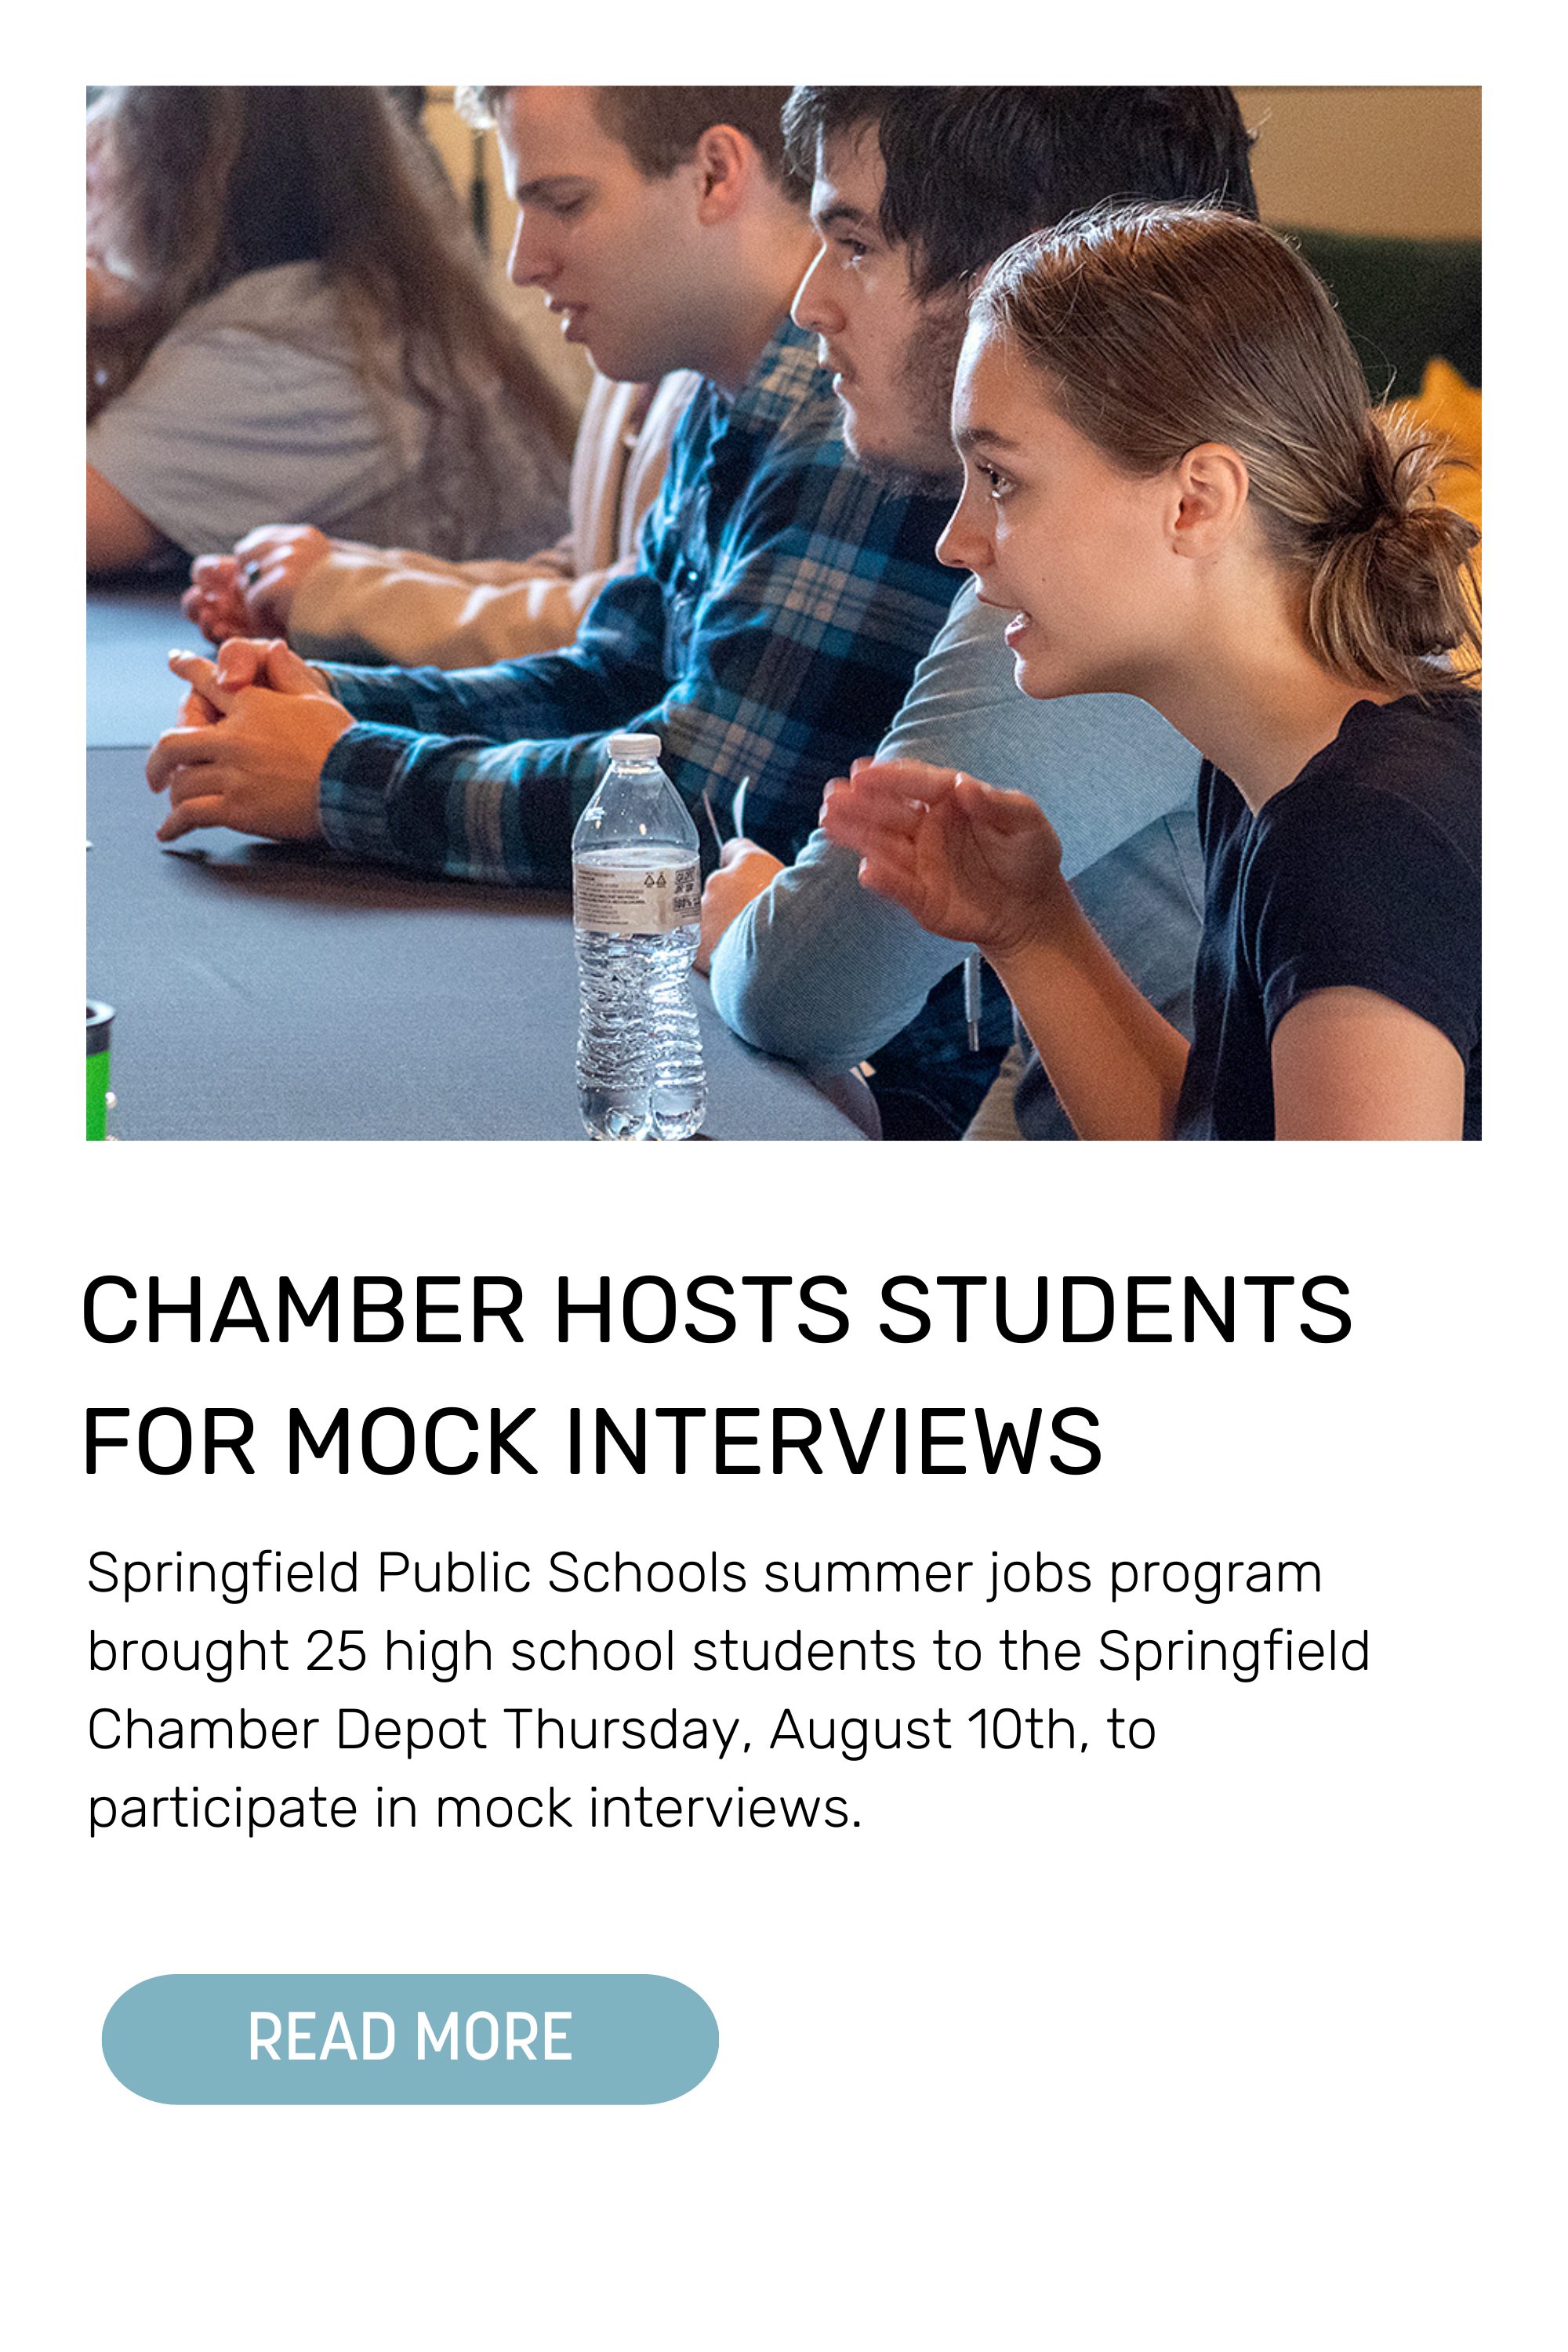 SPRINGFIELD CHAMBER HOSTS SPRINGFIELD PUBLIC SCHOOLS STUDENTS FOR MOCK INTERVIEWS